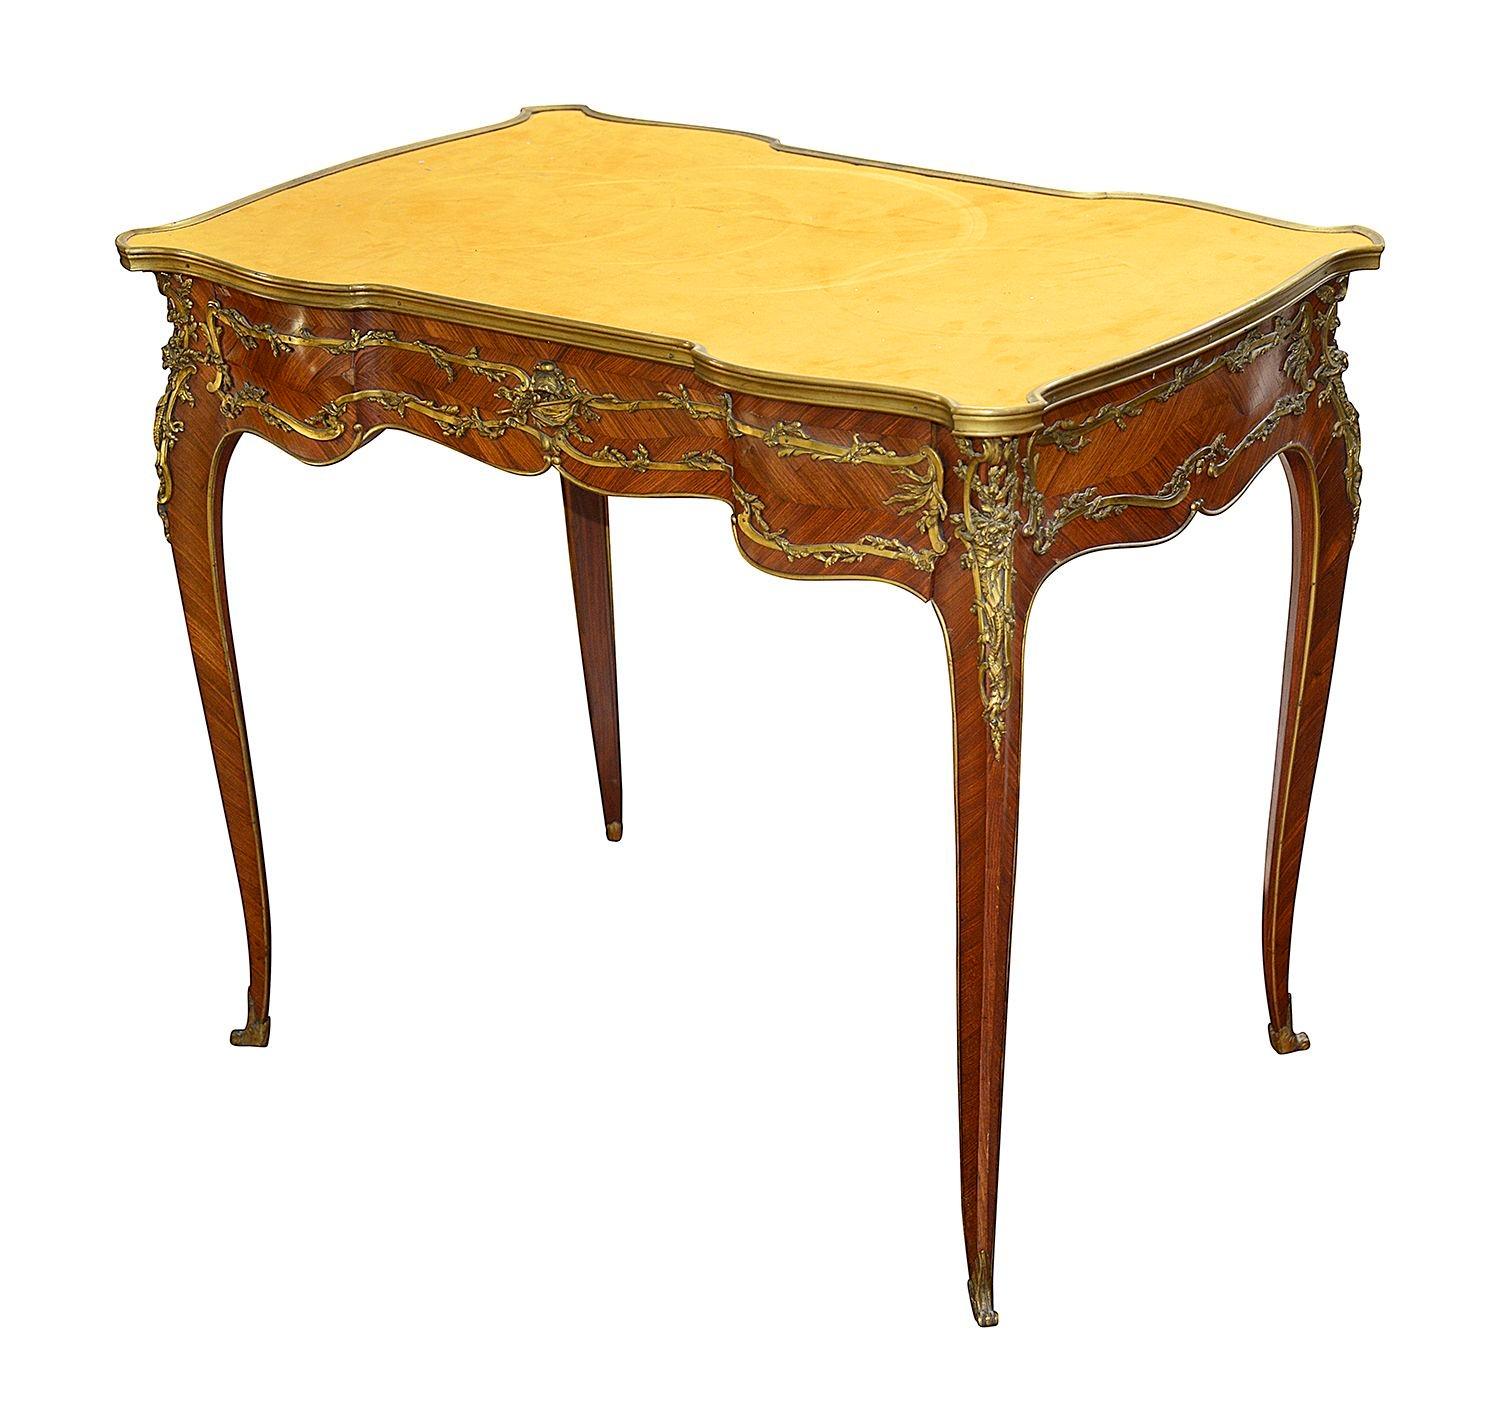 A fine quality, elegant late 19th century French Louis XV style Kingwood serpentine shaped bureau plat, having an inset suede covered writing surface, a single frieze drawer, wonderful gilded ormolu mounts with entwined leaf decoration, the central